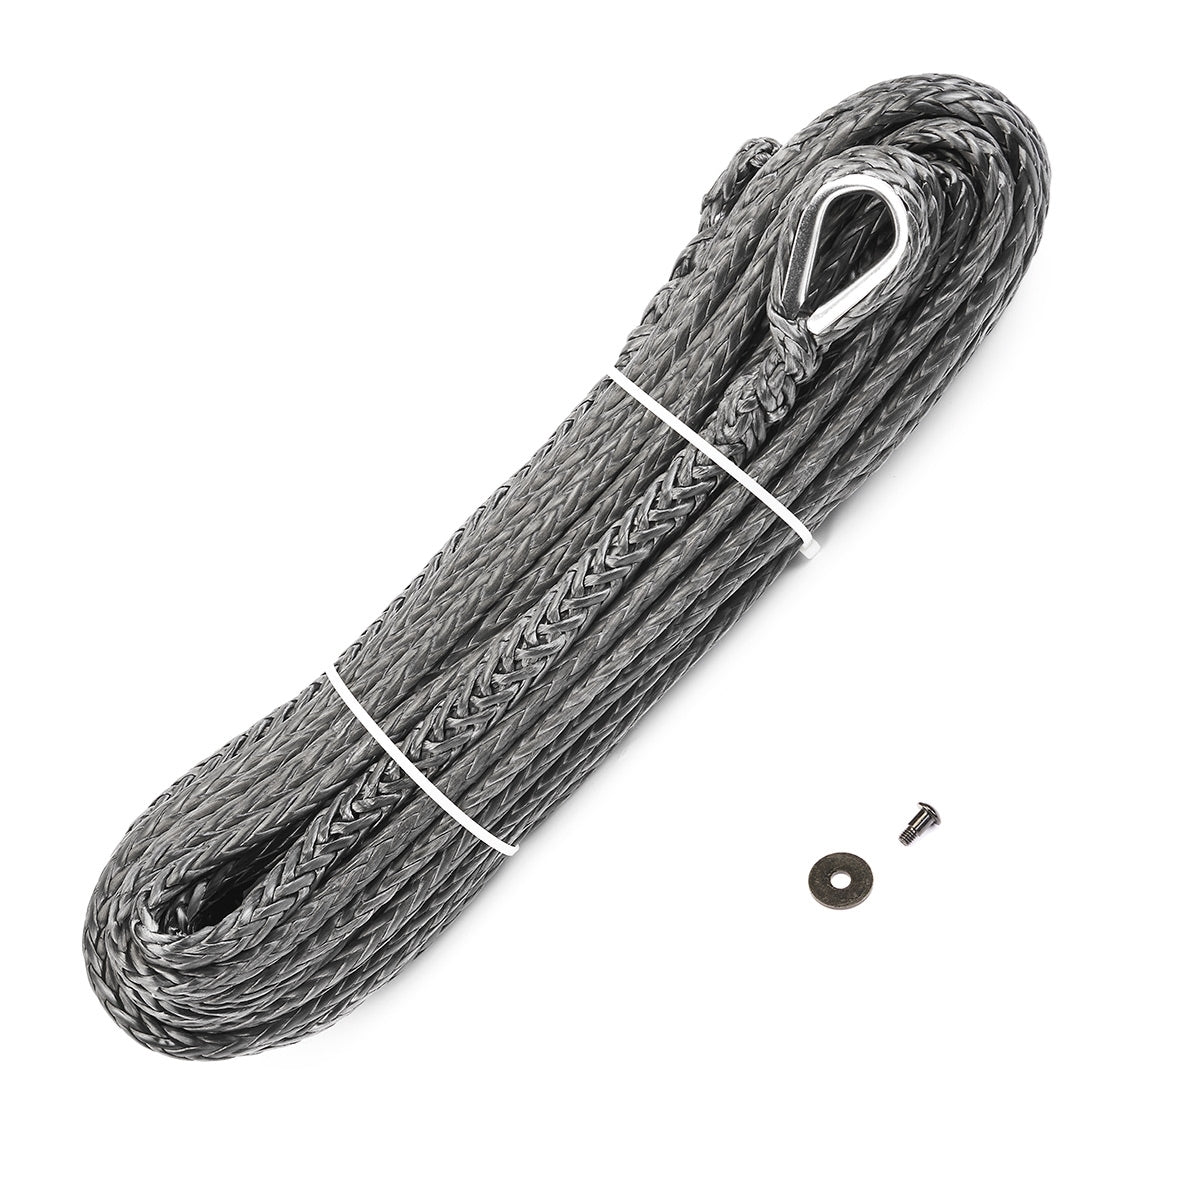 Warn Synthetic Rope for VR Evo